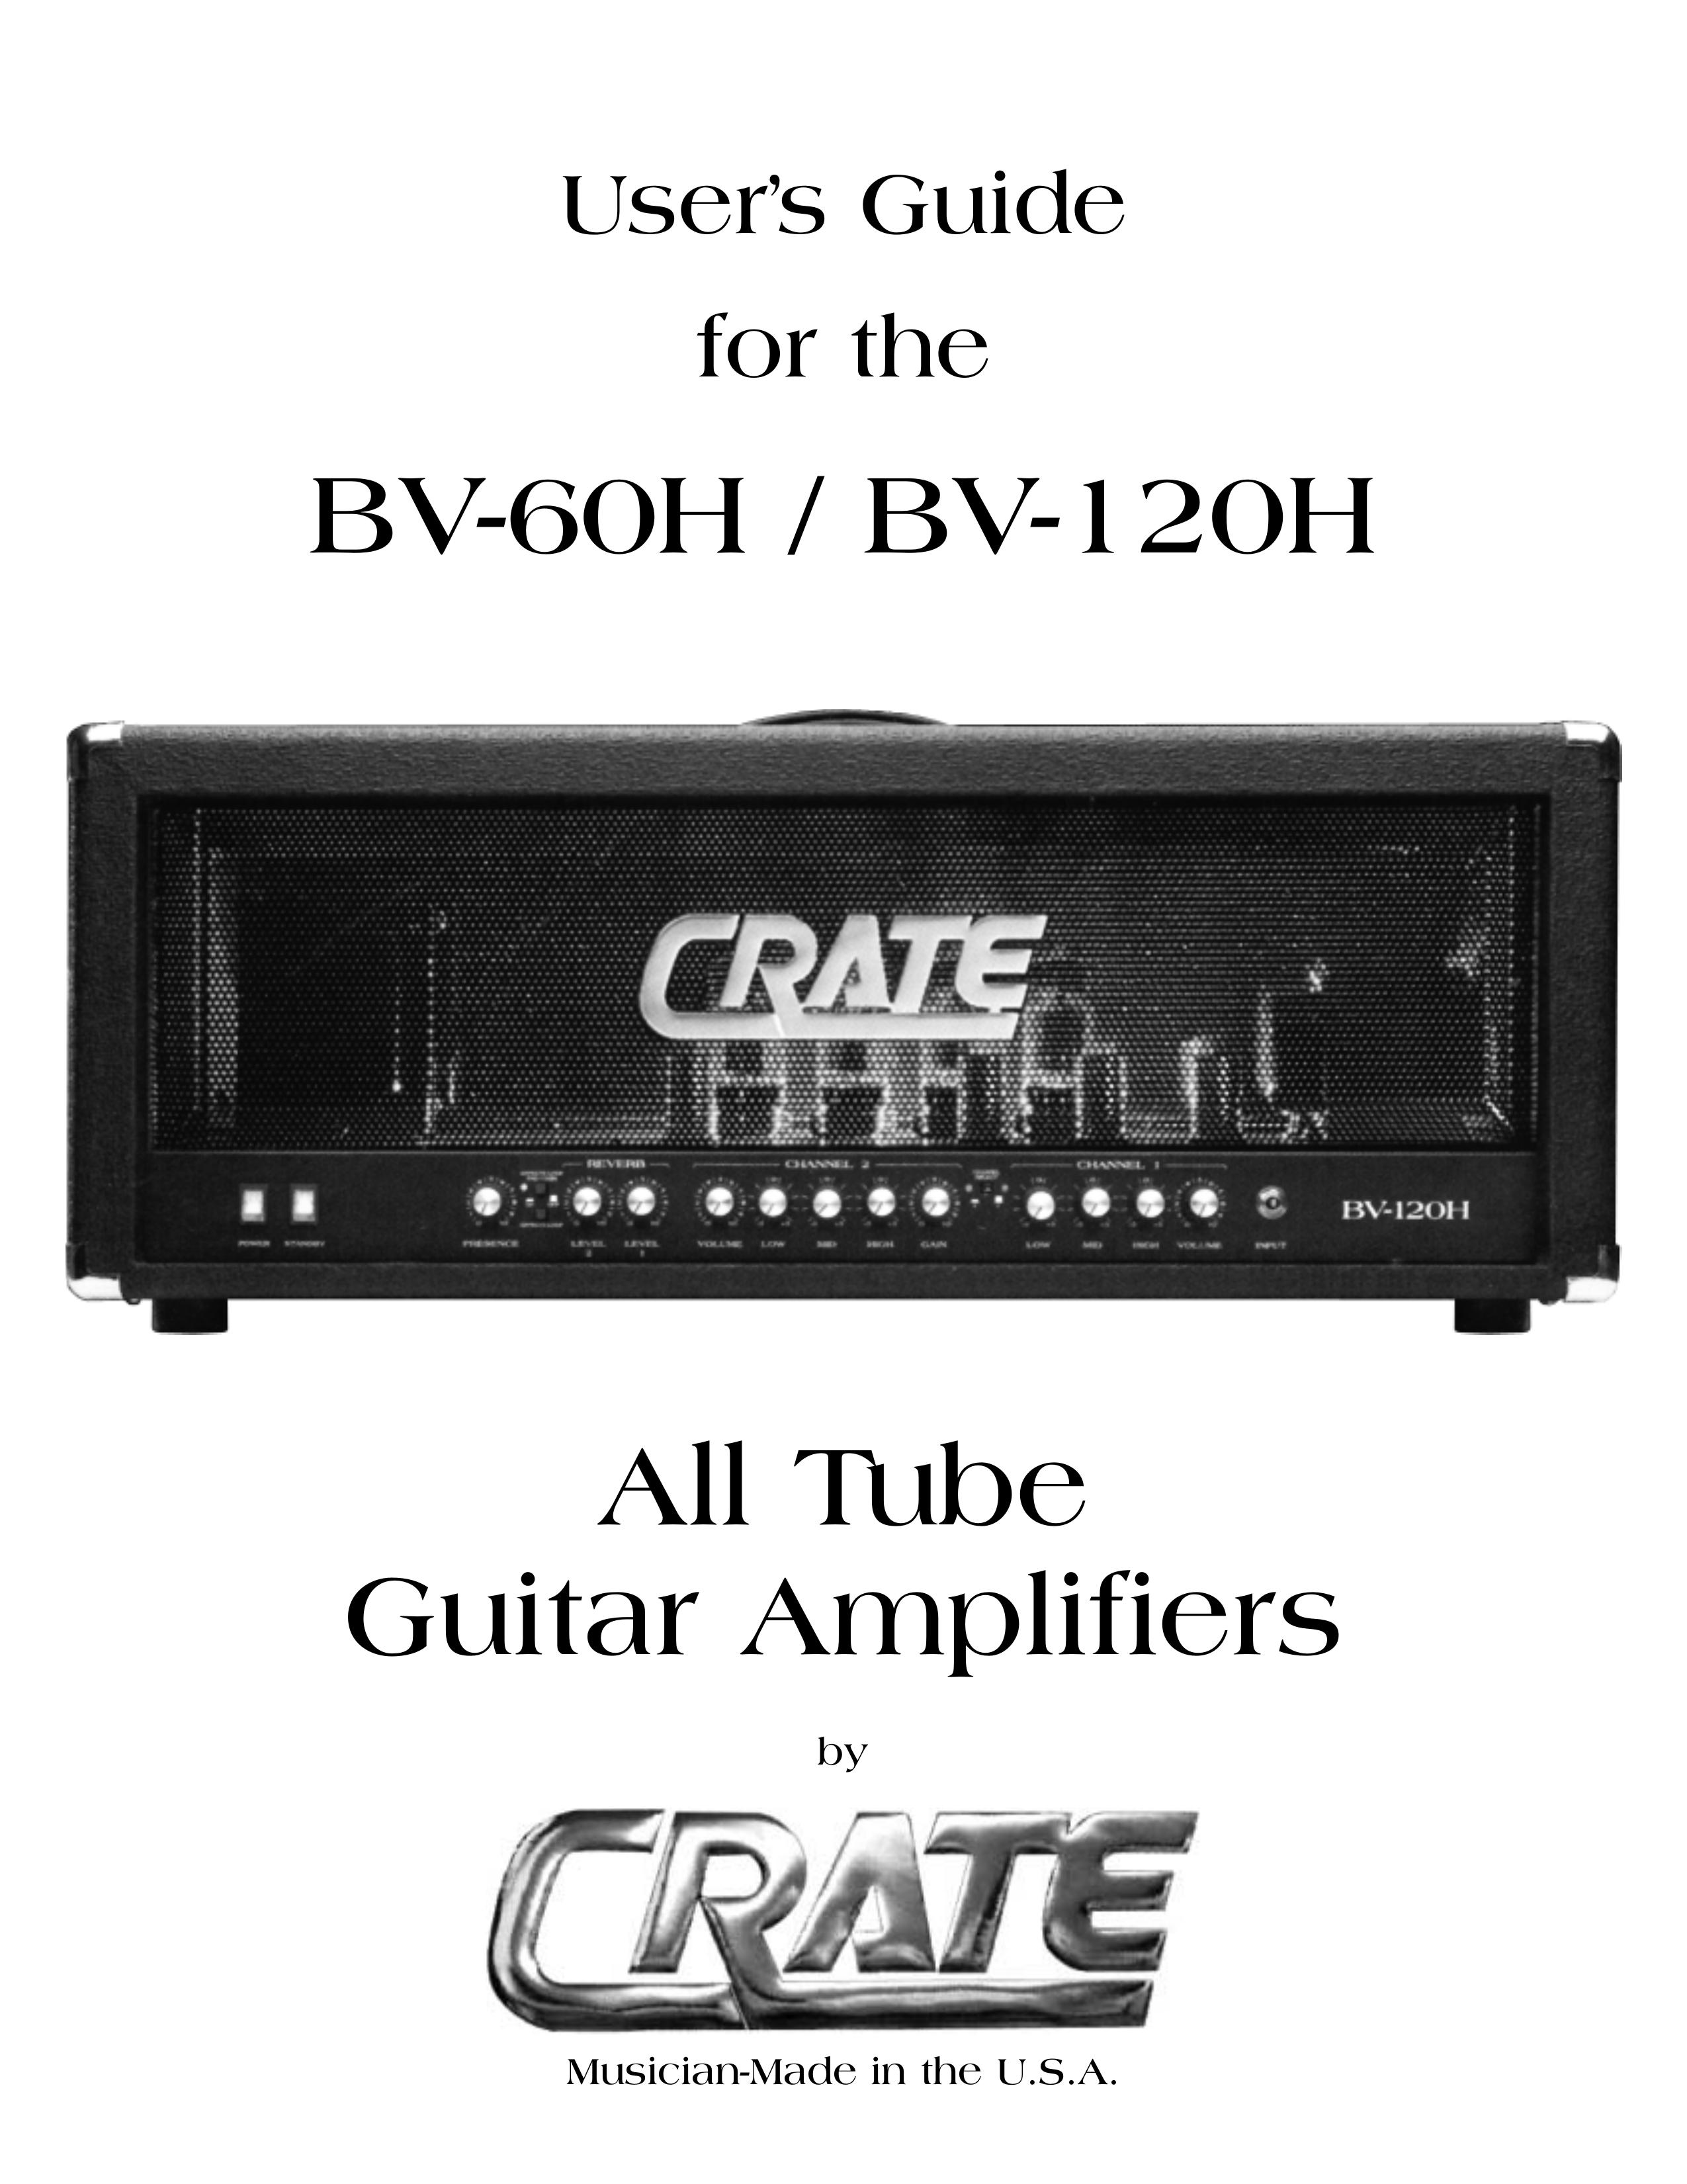 Crate Amplifiers BV-129H Musical Instrument Amplifier User Manual